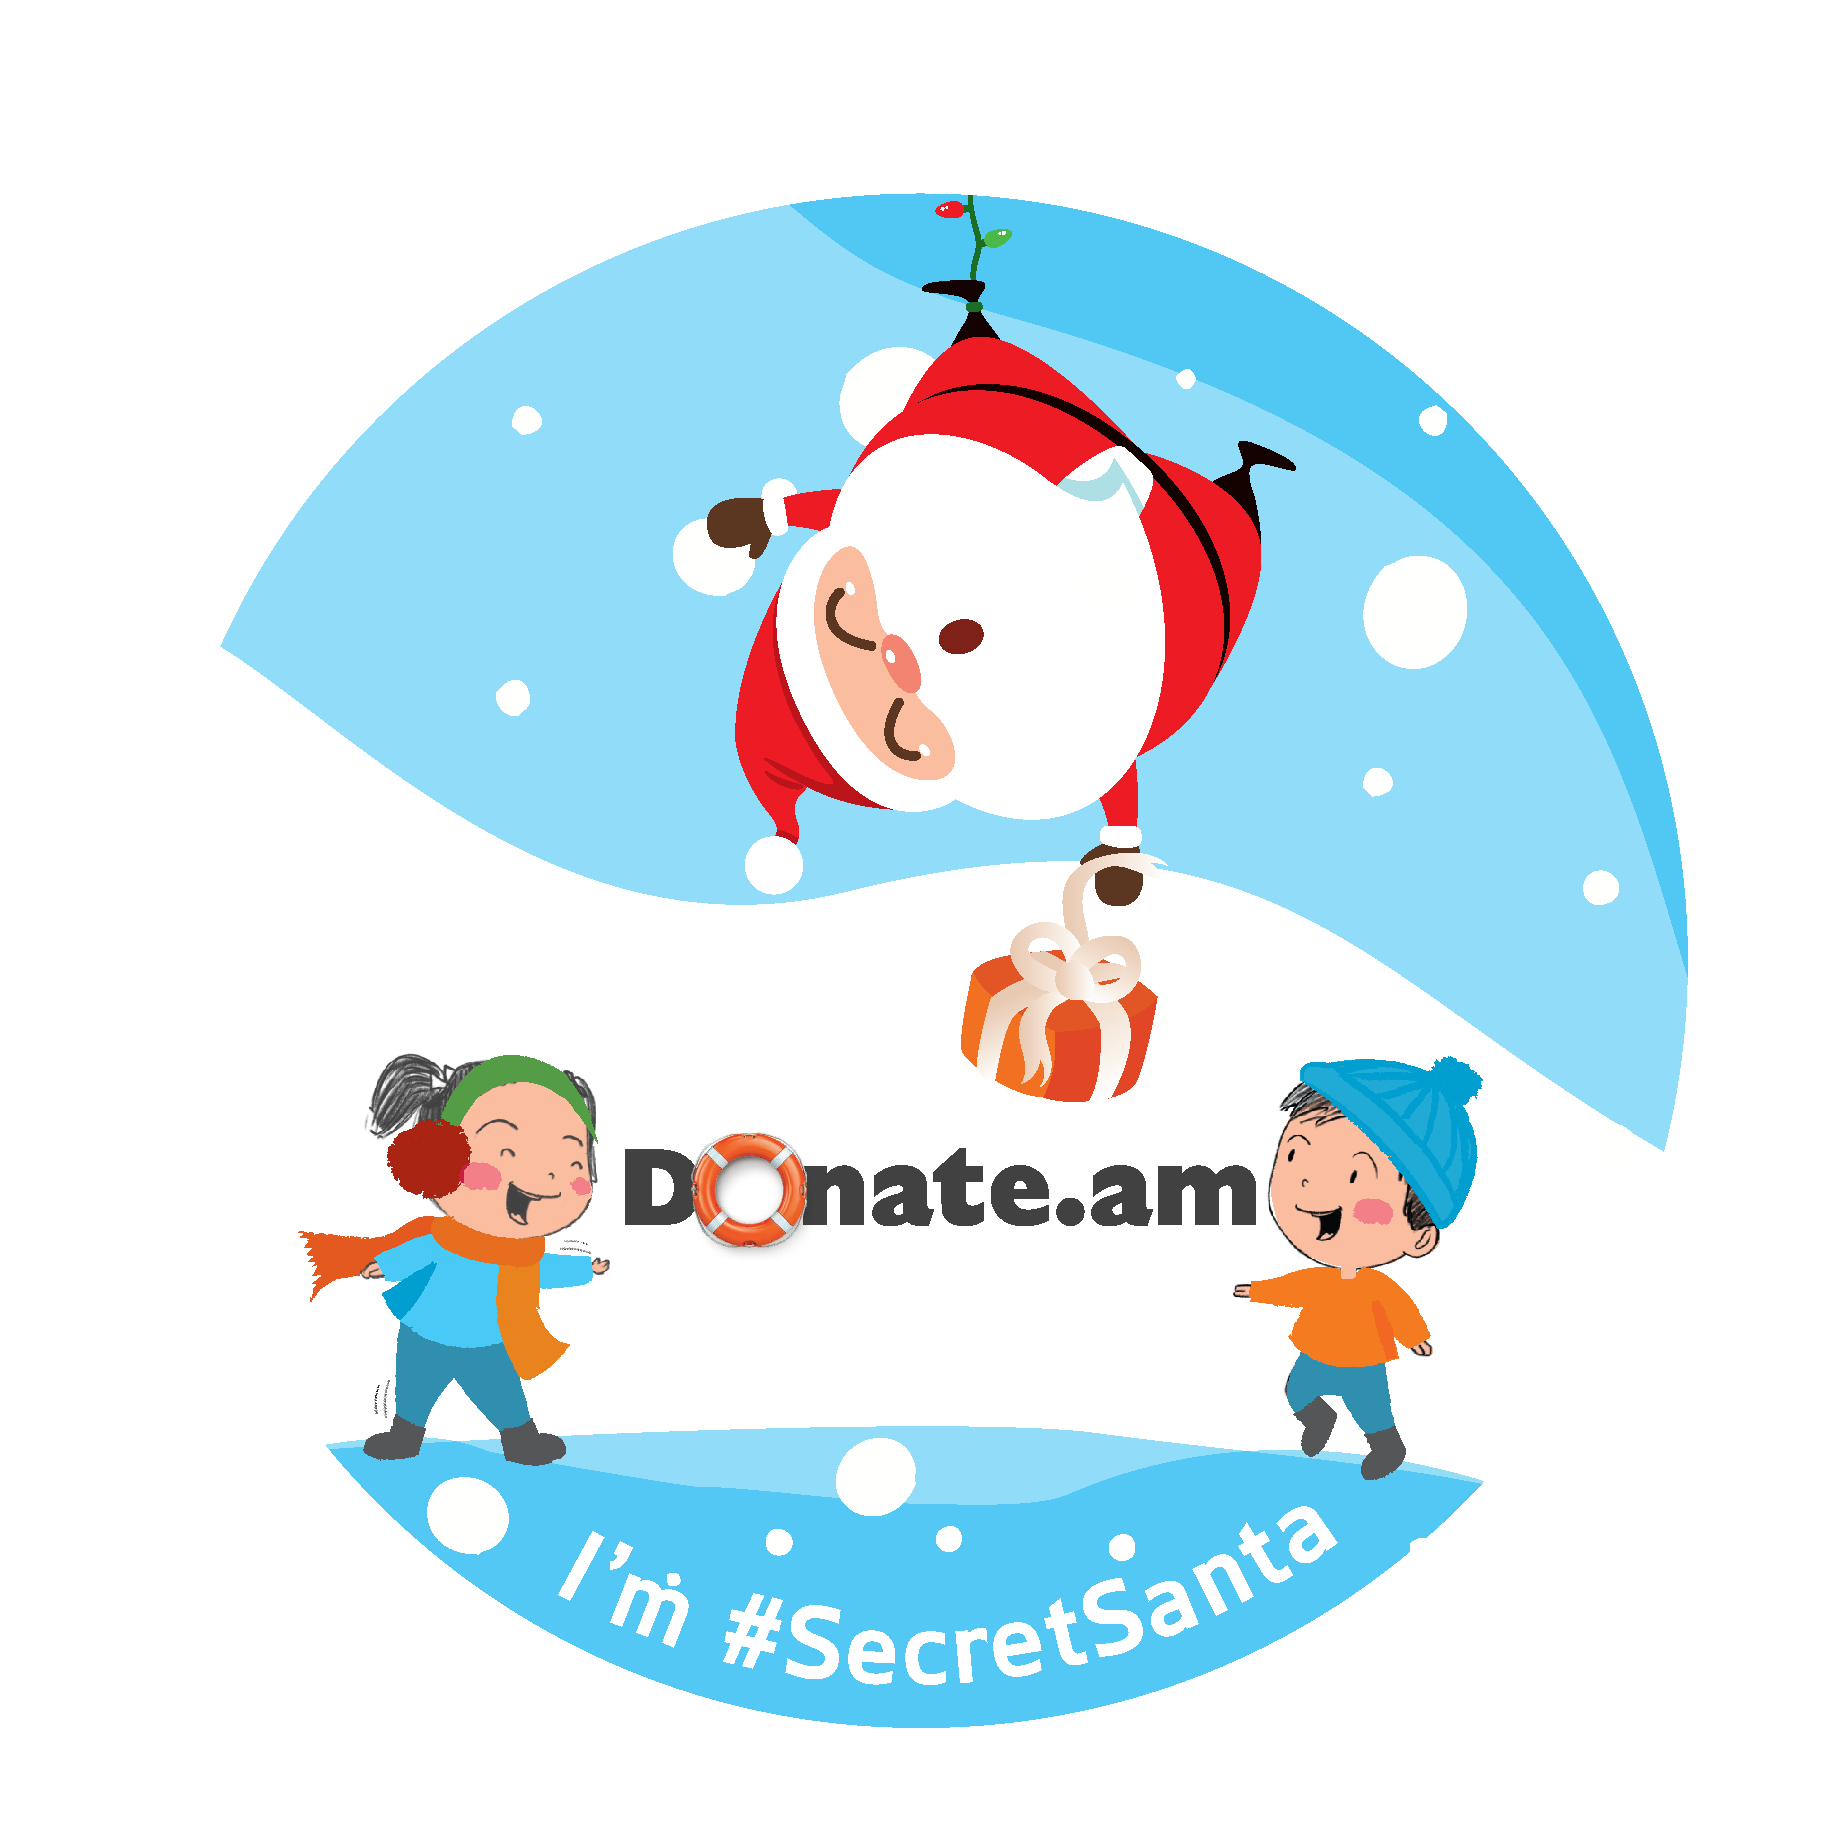 Become a #SecretSanta։ World Vision launches one of its beloved fundraising  campaigns | Armenia | World Vision International